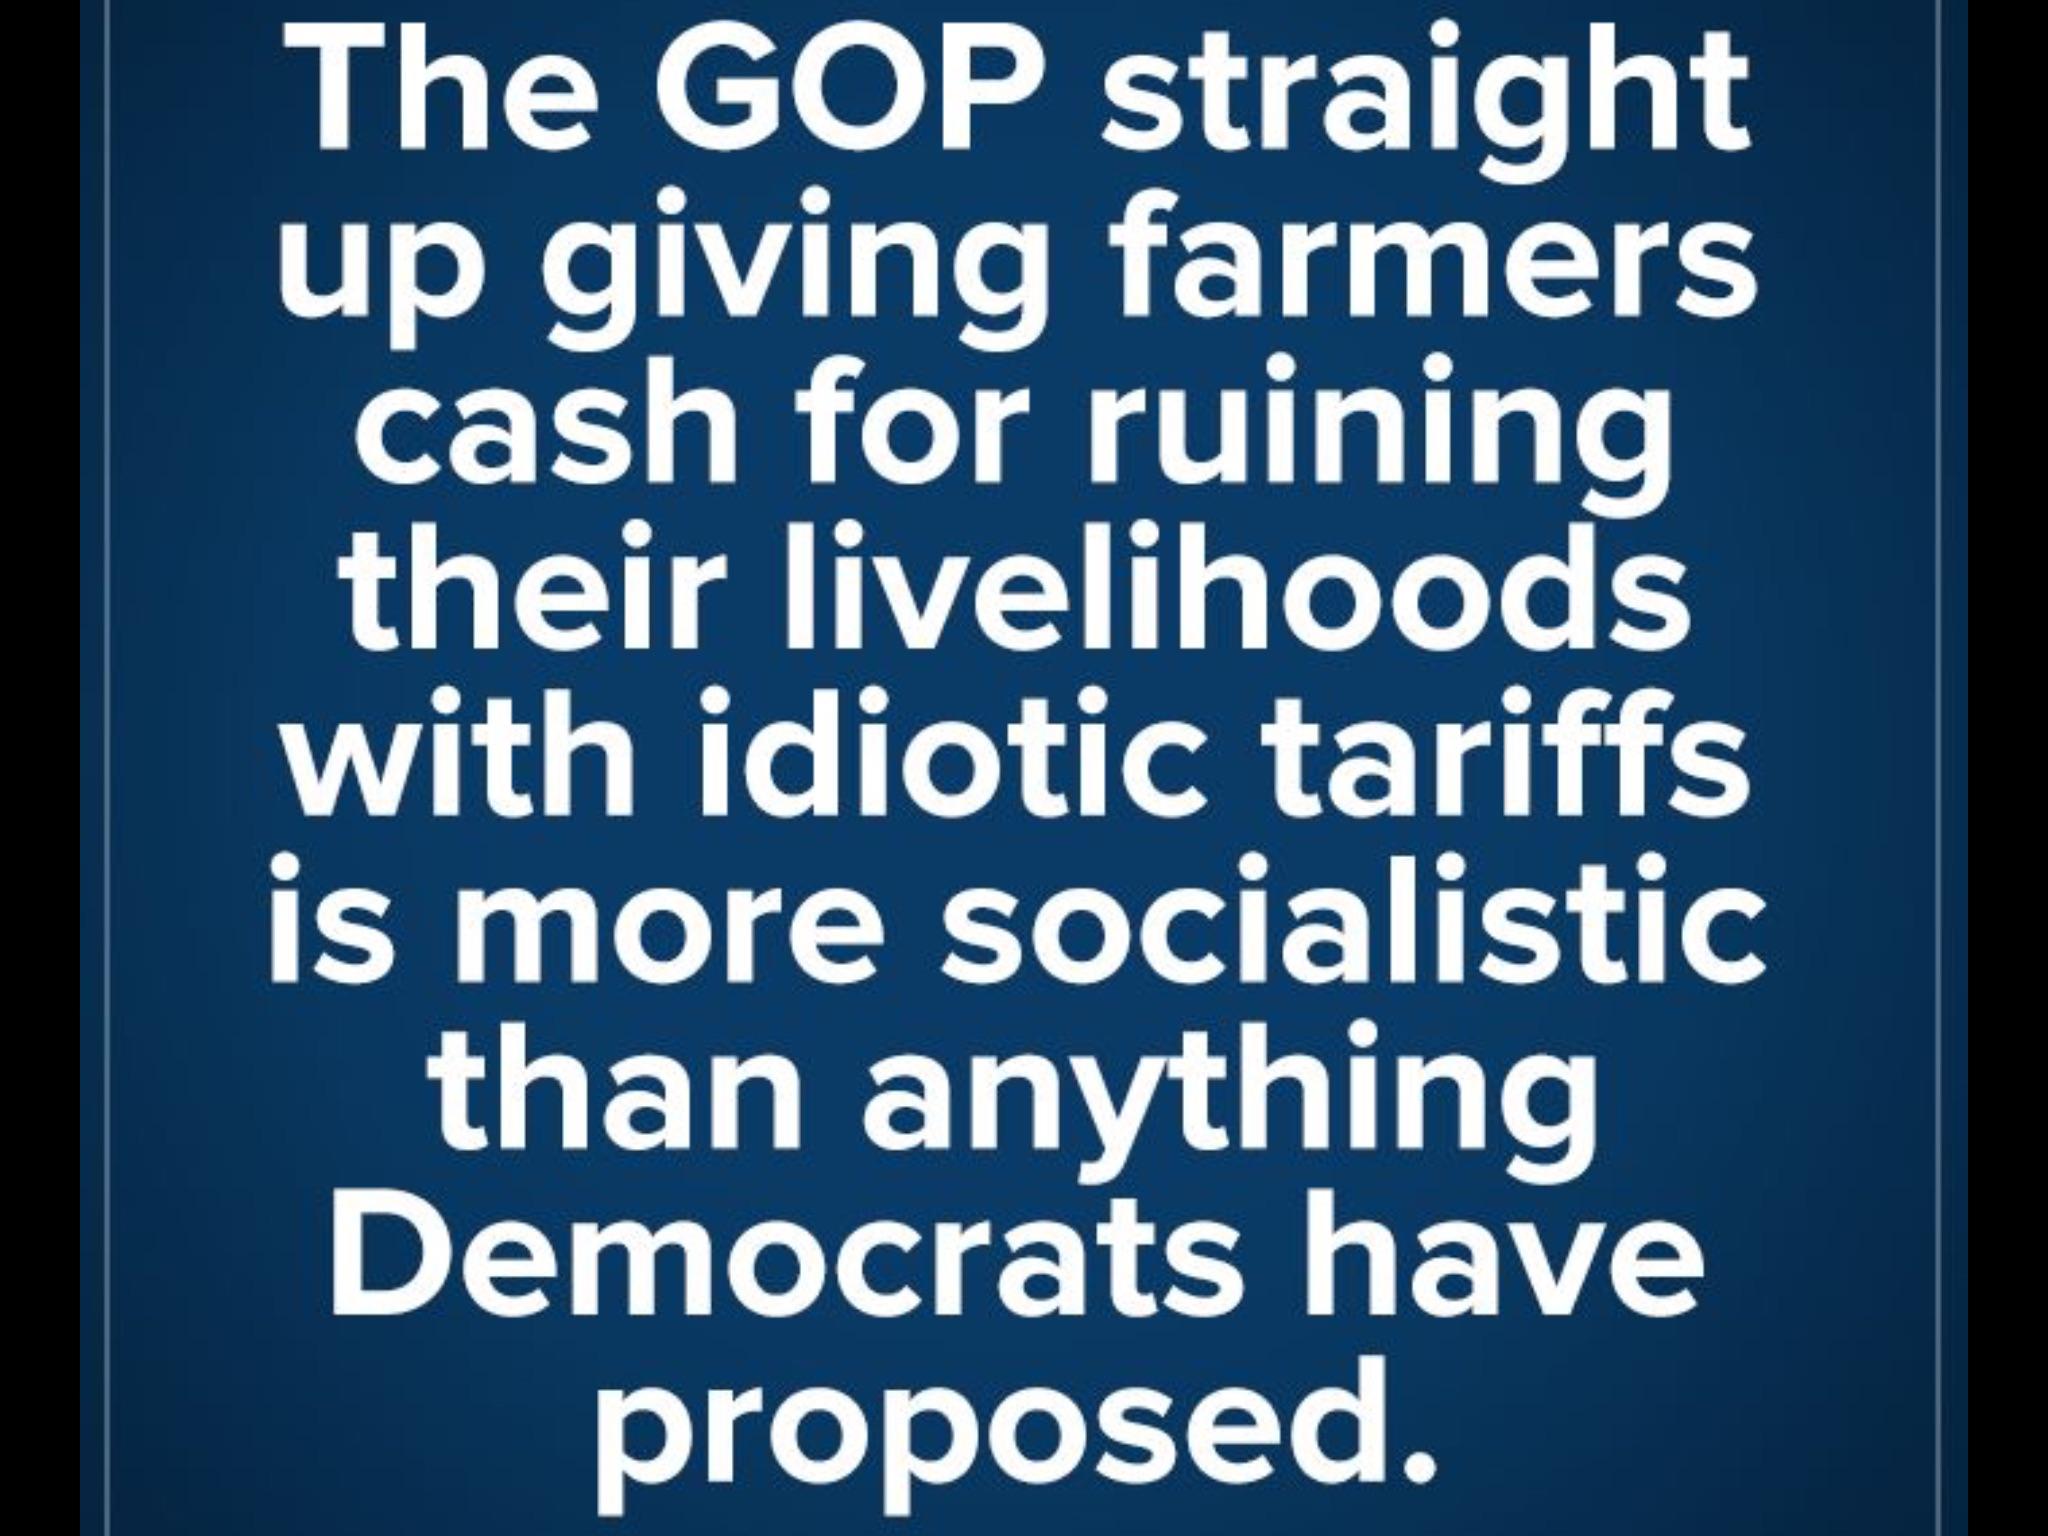 gardena pass - The Gop straight up giving farmers cash for ruining their livelihoods with idiotic tariffs is more socialistic than anything Democrats have proposed.